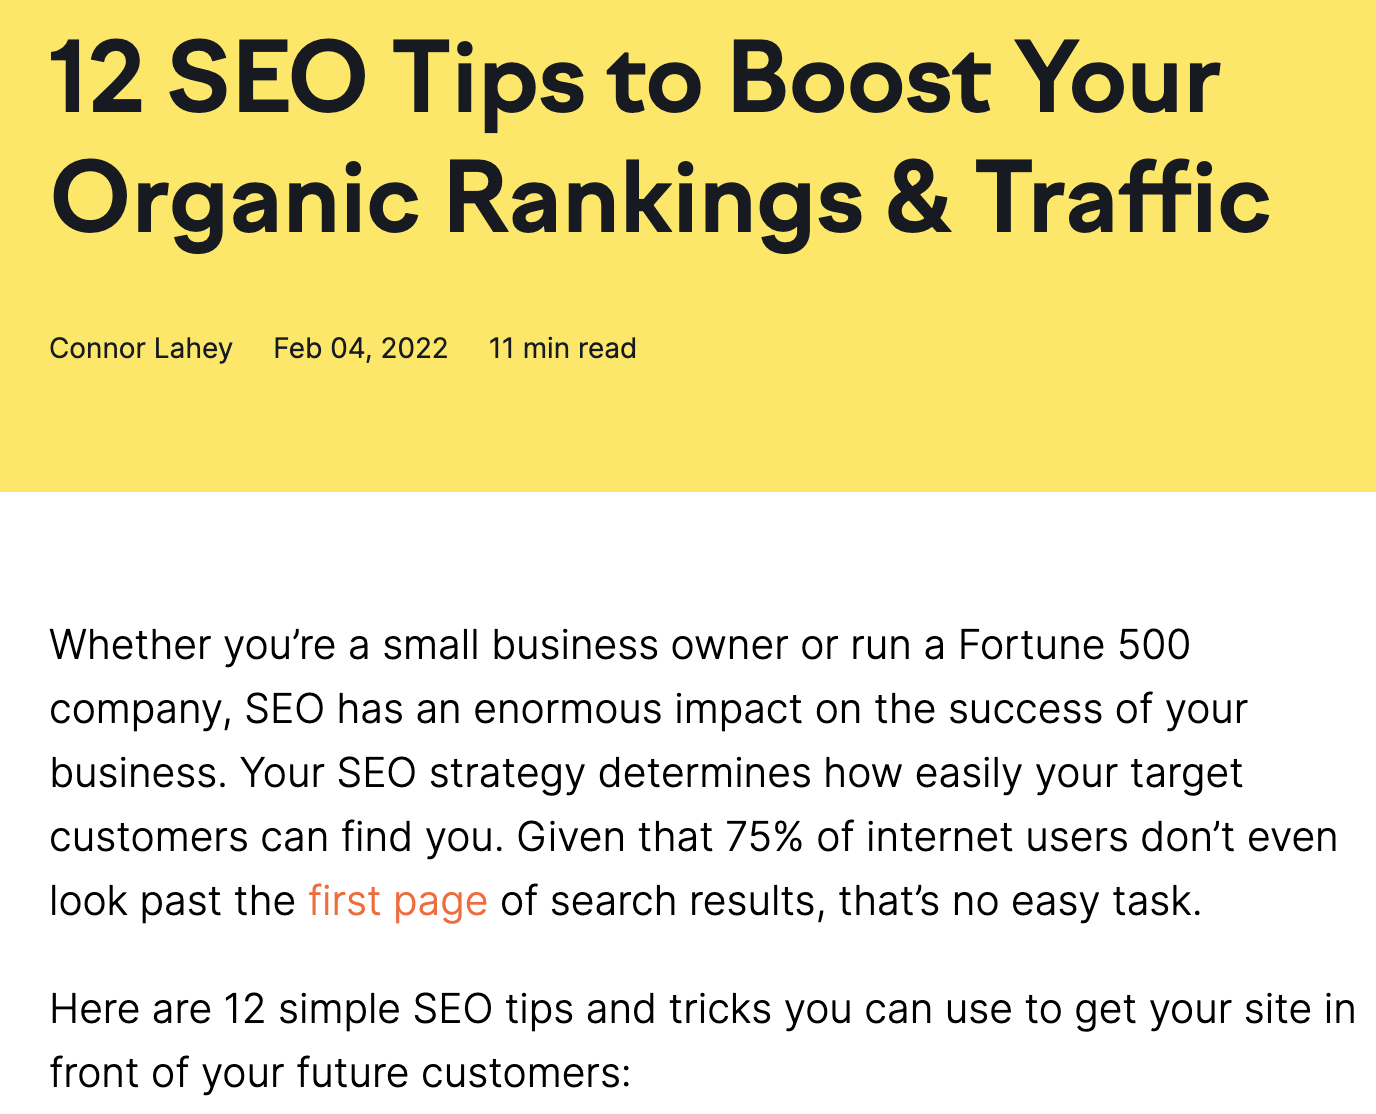 "12 SEO tips to boost your organic traffic & rankings" blog